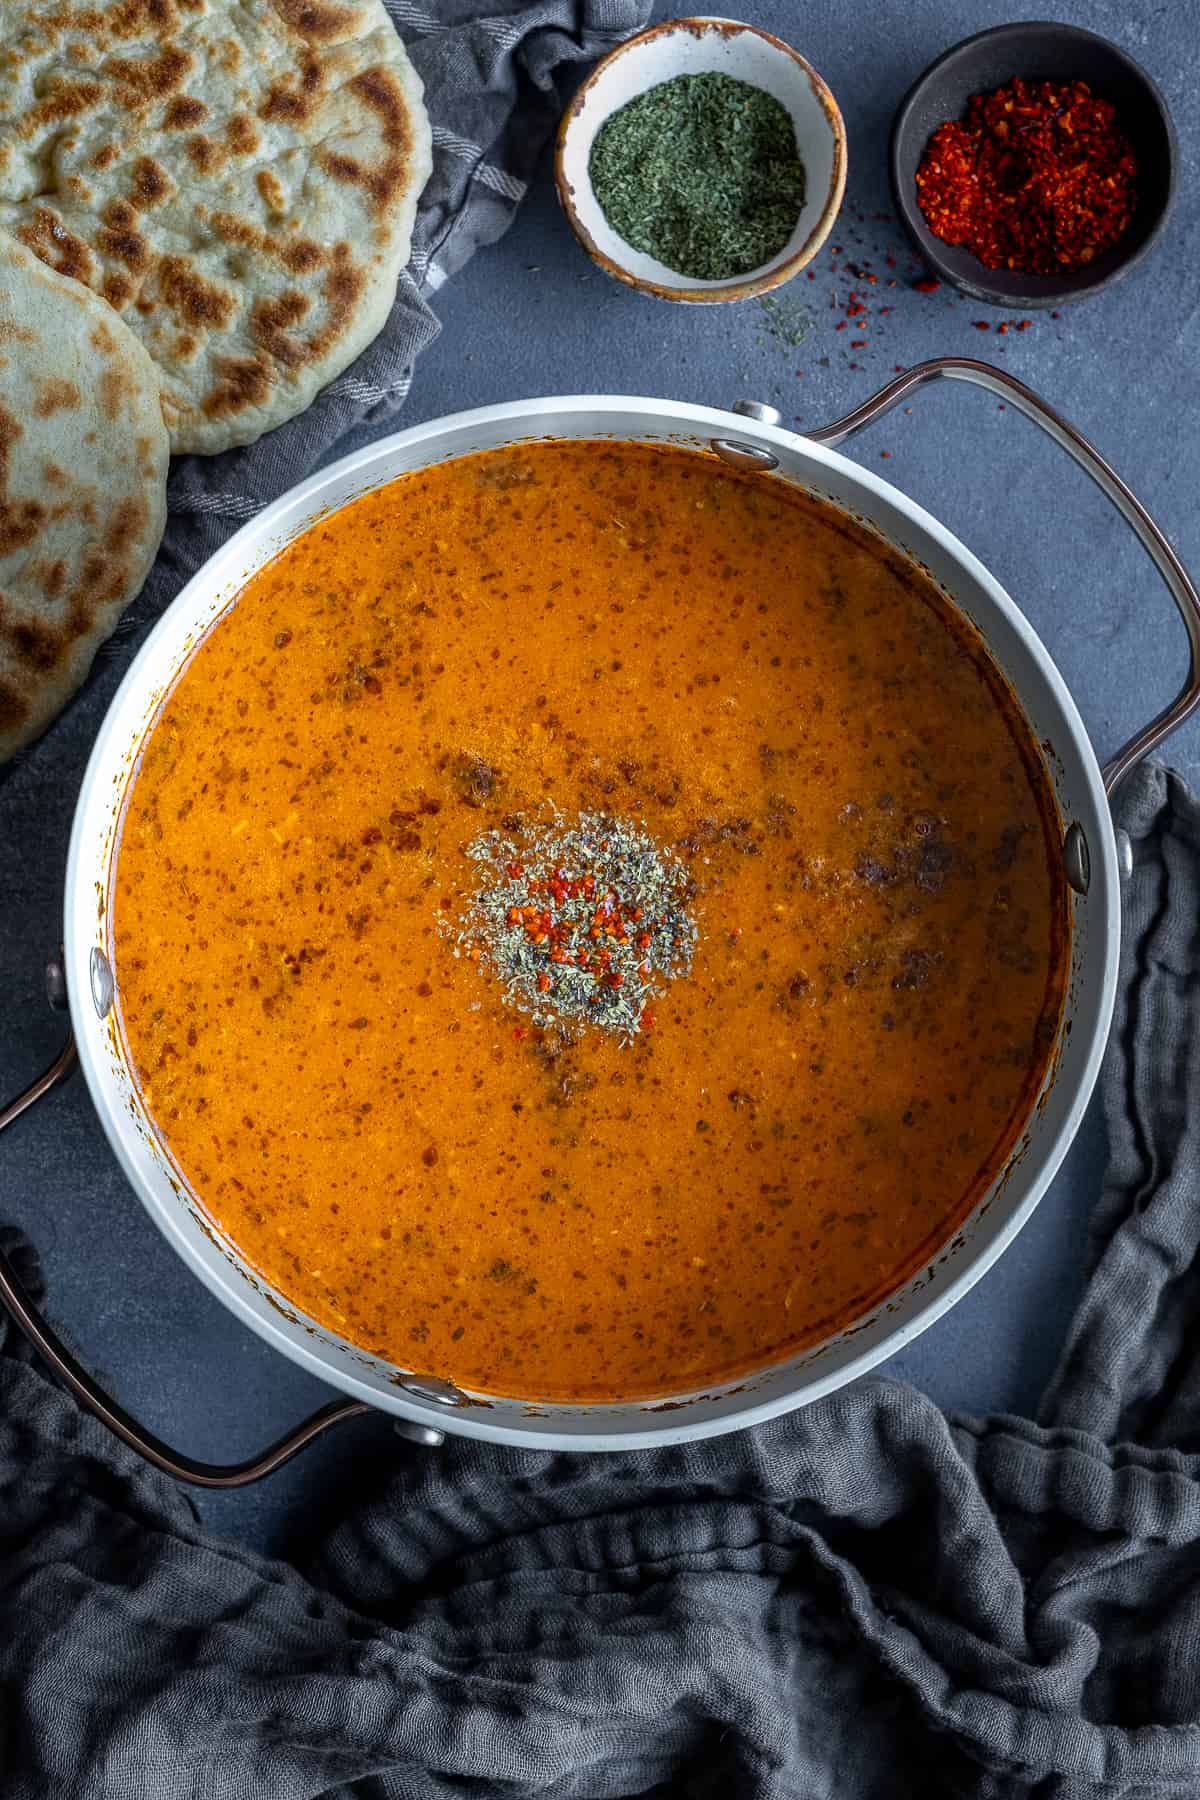 Tarhana soup in a white pot accompanied by Turkish bazlama bread, dried mint and red pepper flakes.